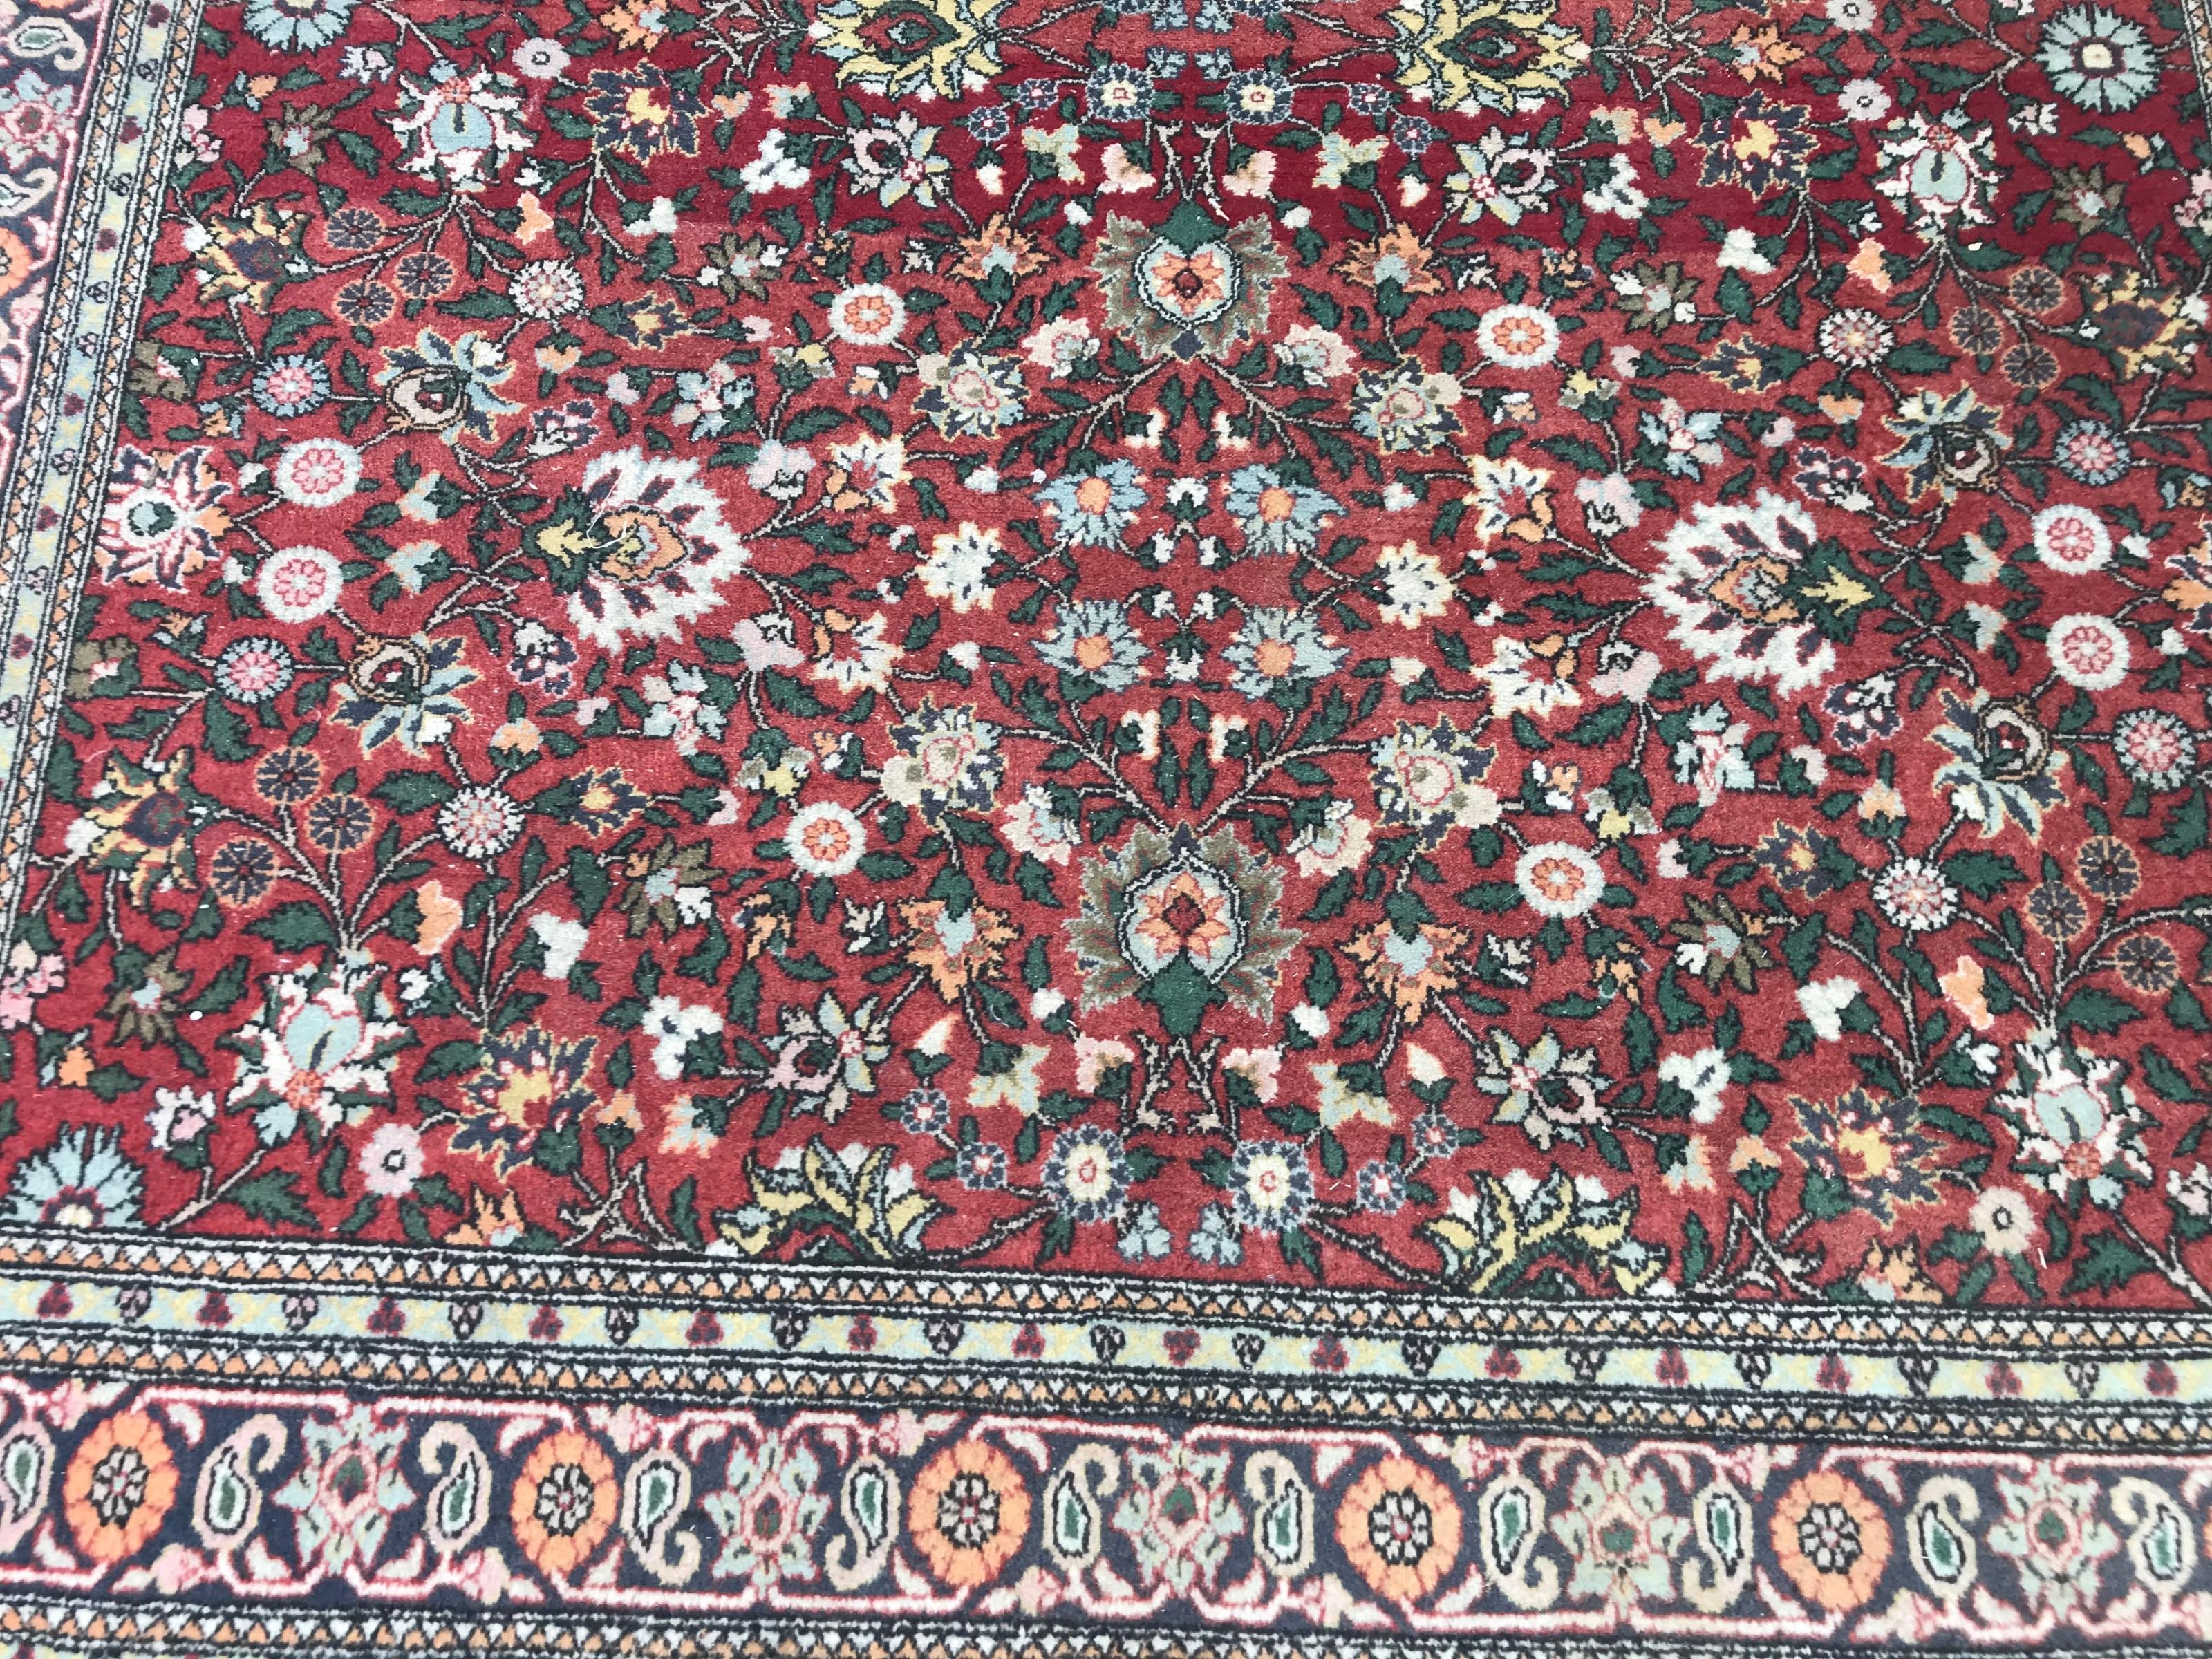 Very nice Turkish rug with beautiful floral design and beautiful colors with orange, blue and green, finely hand knotted with wool velvet on cotton foundation.

✨✨✨
